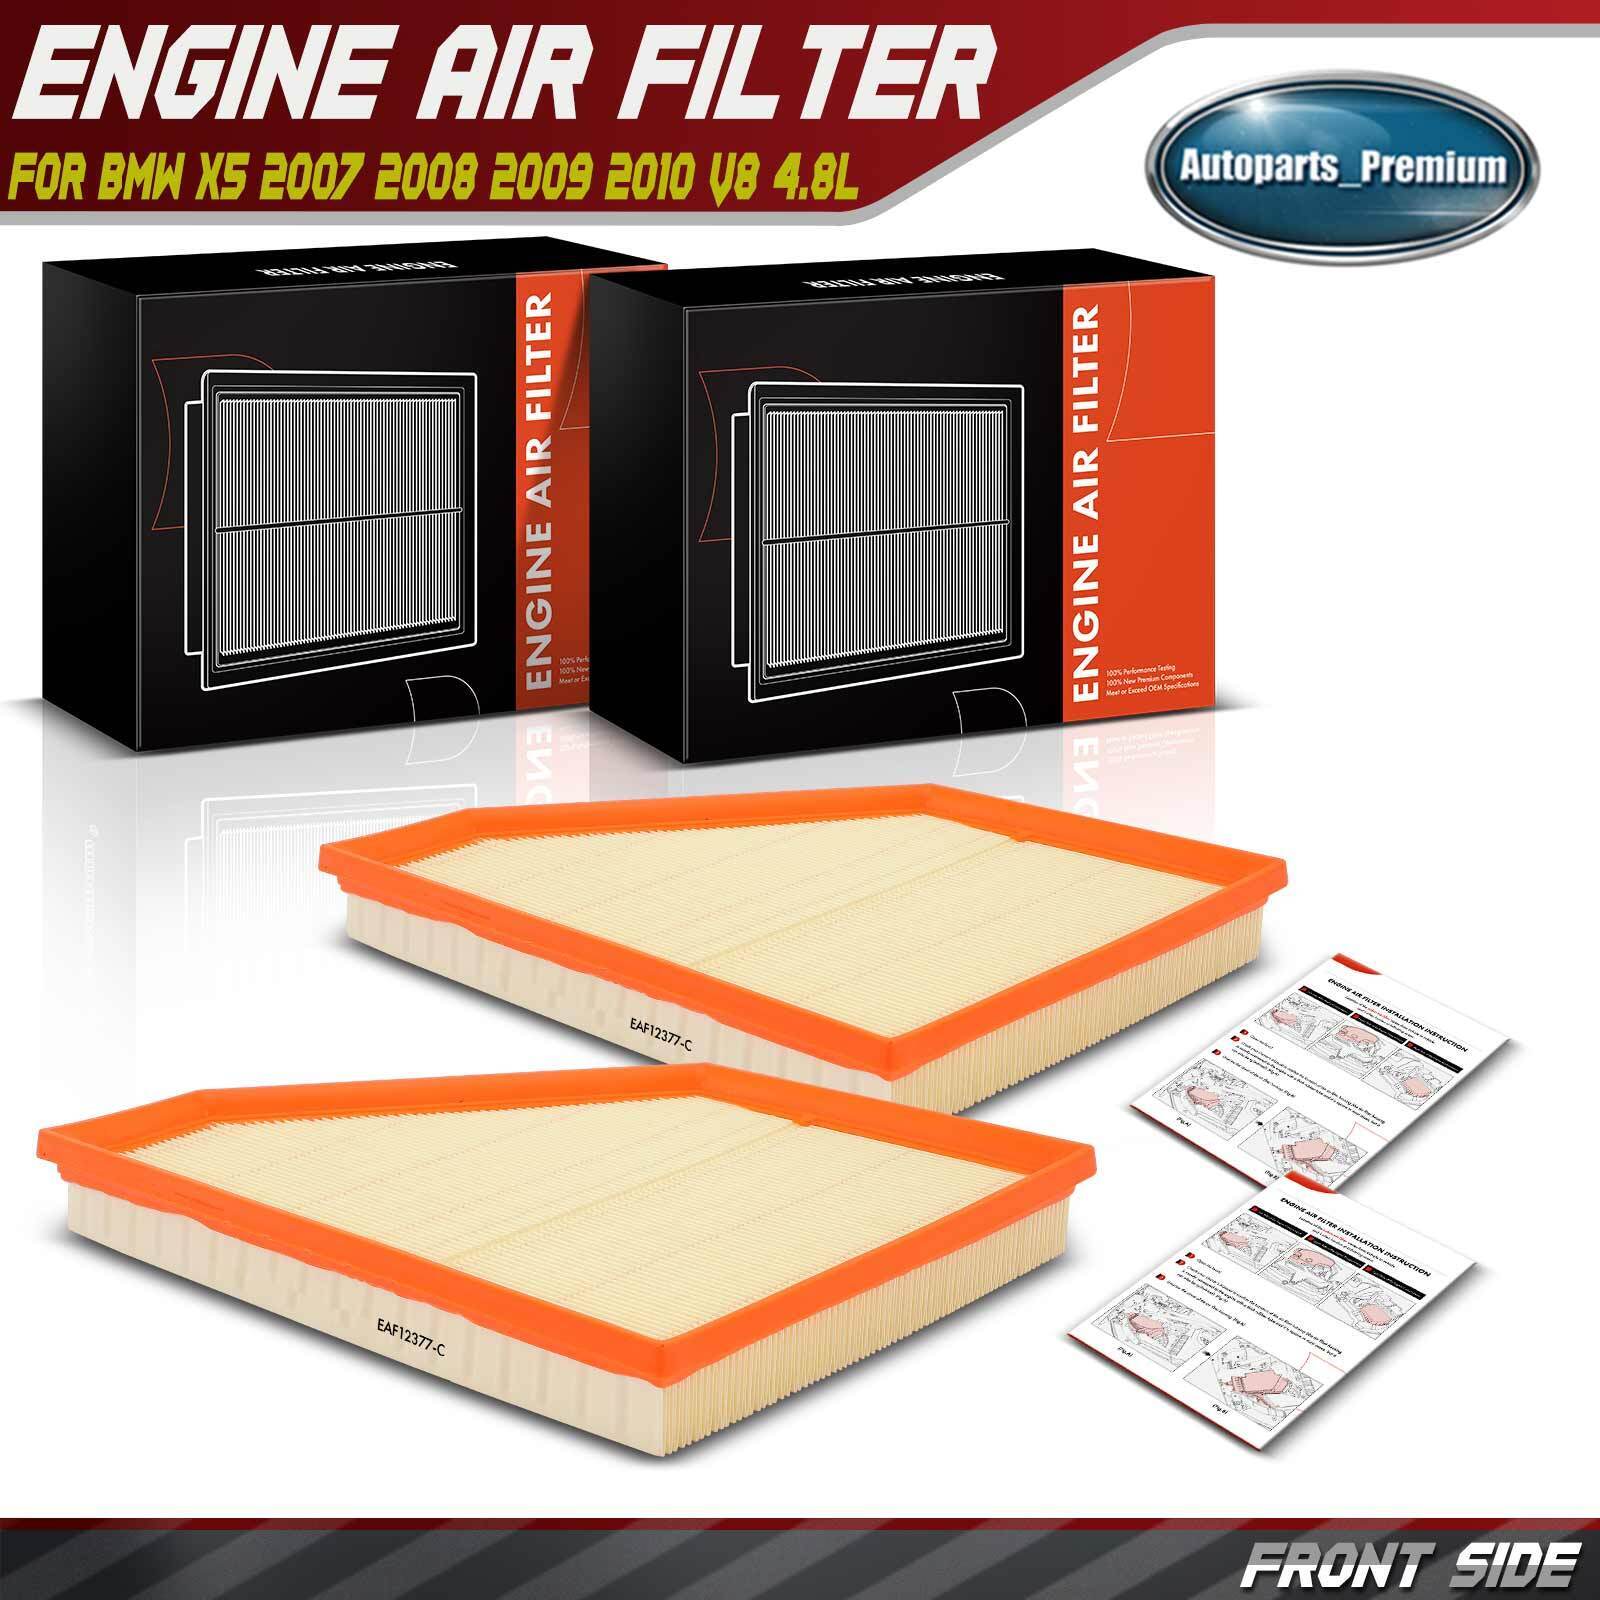 2x Left and Right Side Engine Air Filter for BMW X5 2007 2008 2009 2010 V8 4.8L